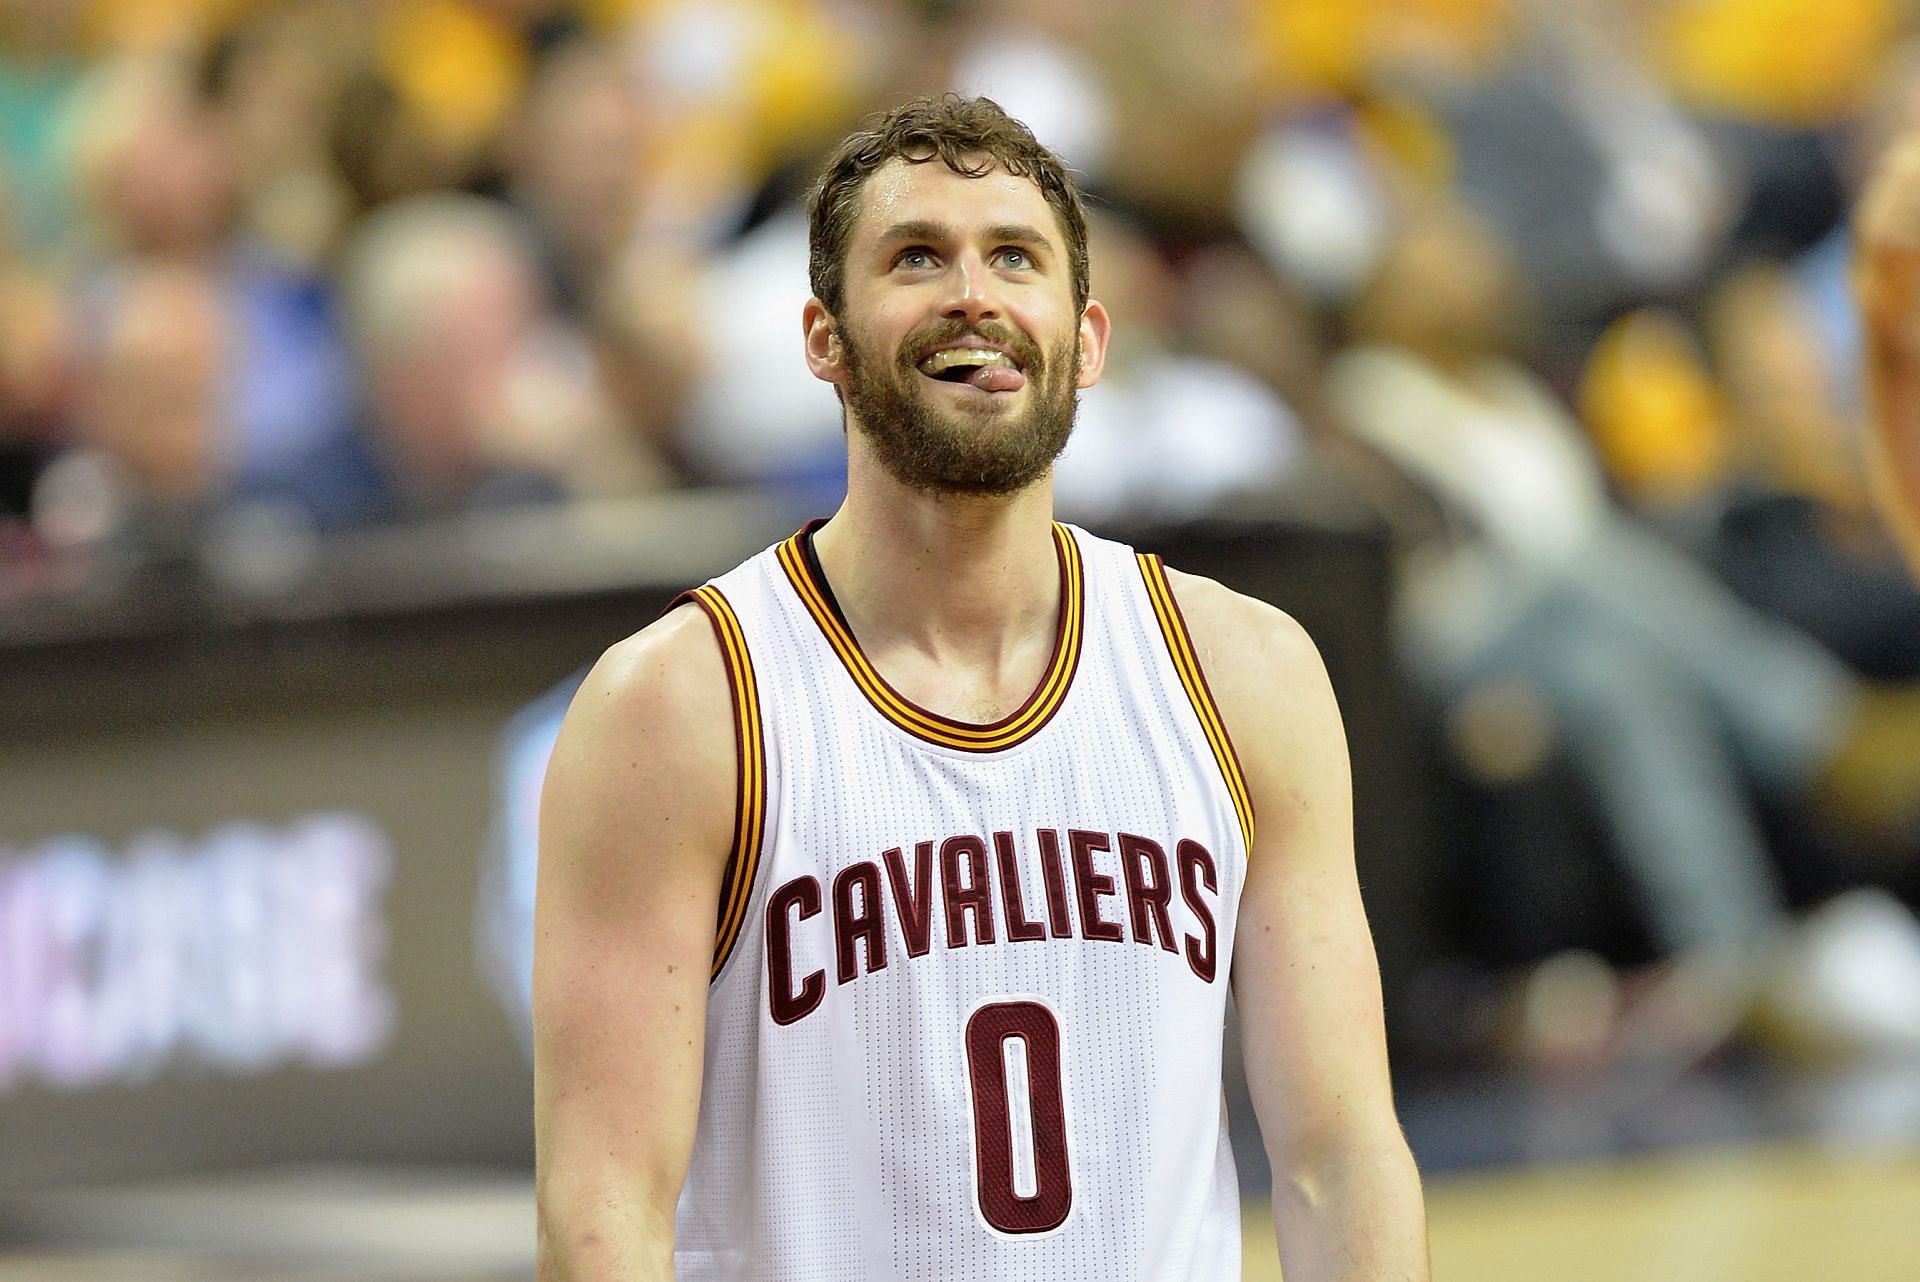 Kevin Love during his time with the Cleveland Cavaliers